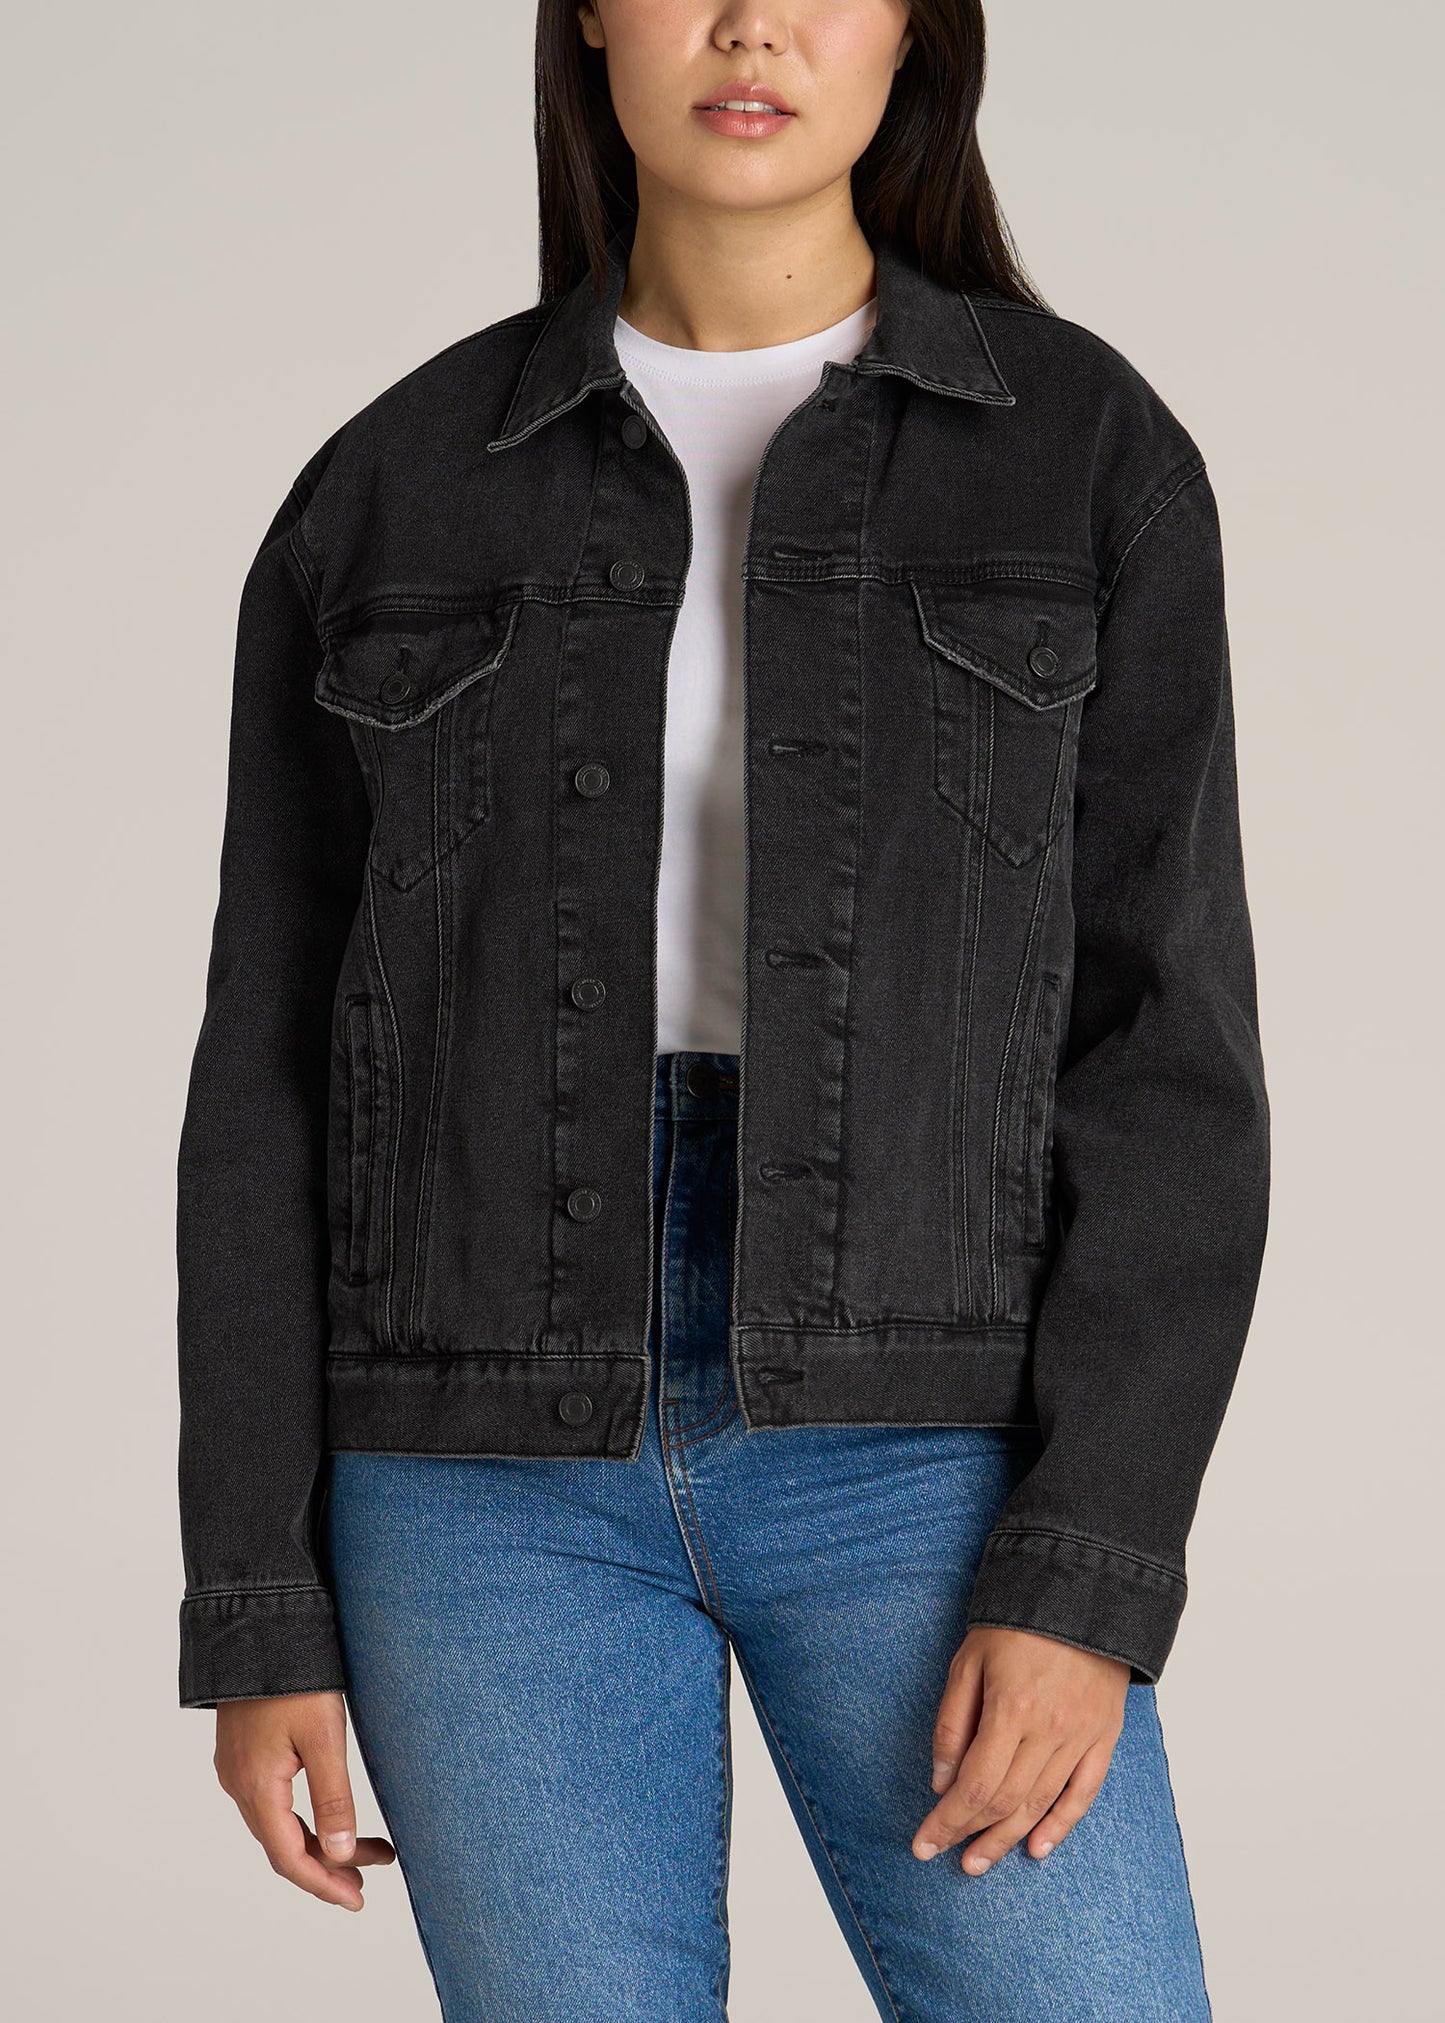 American-Tall-Women-Relaxed-Denim-Jacket-Black-Stone-Wash-front